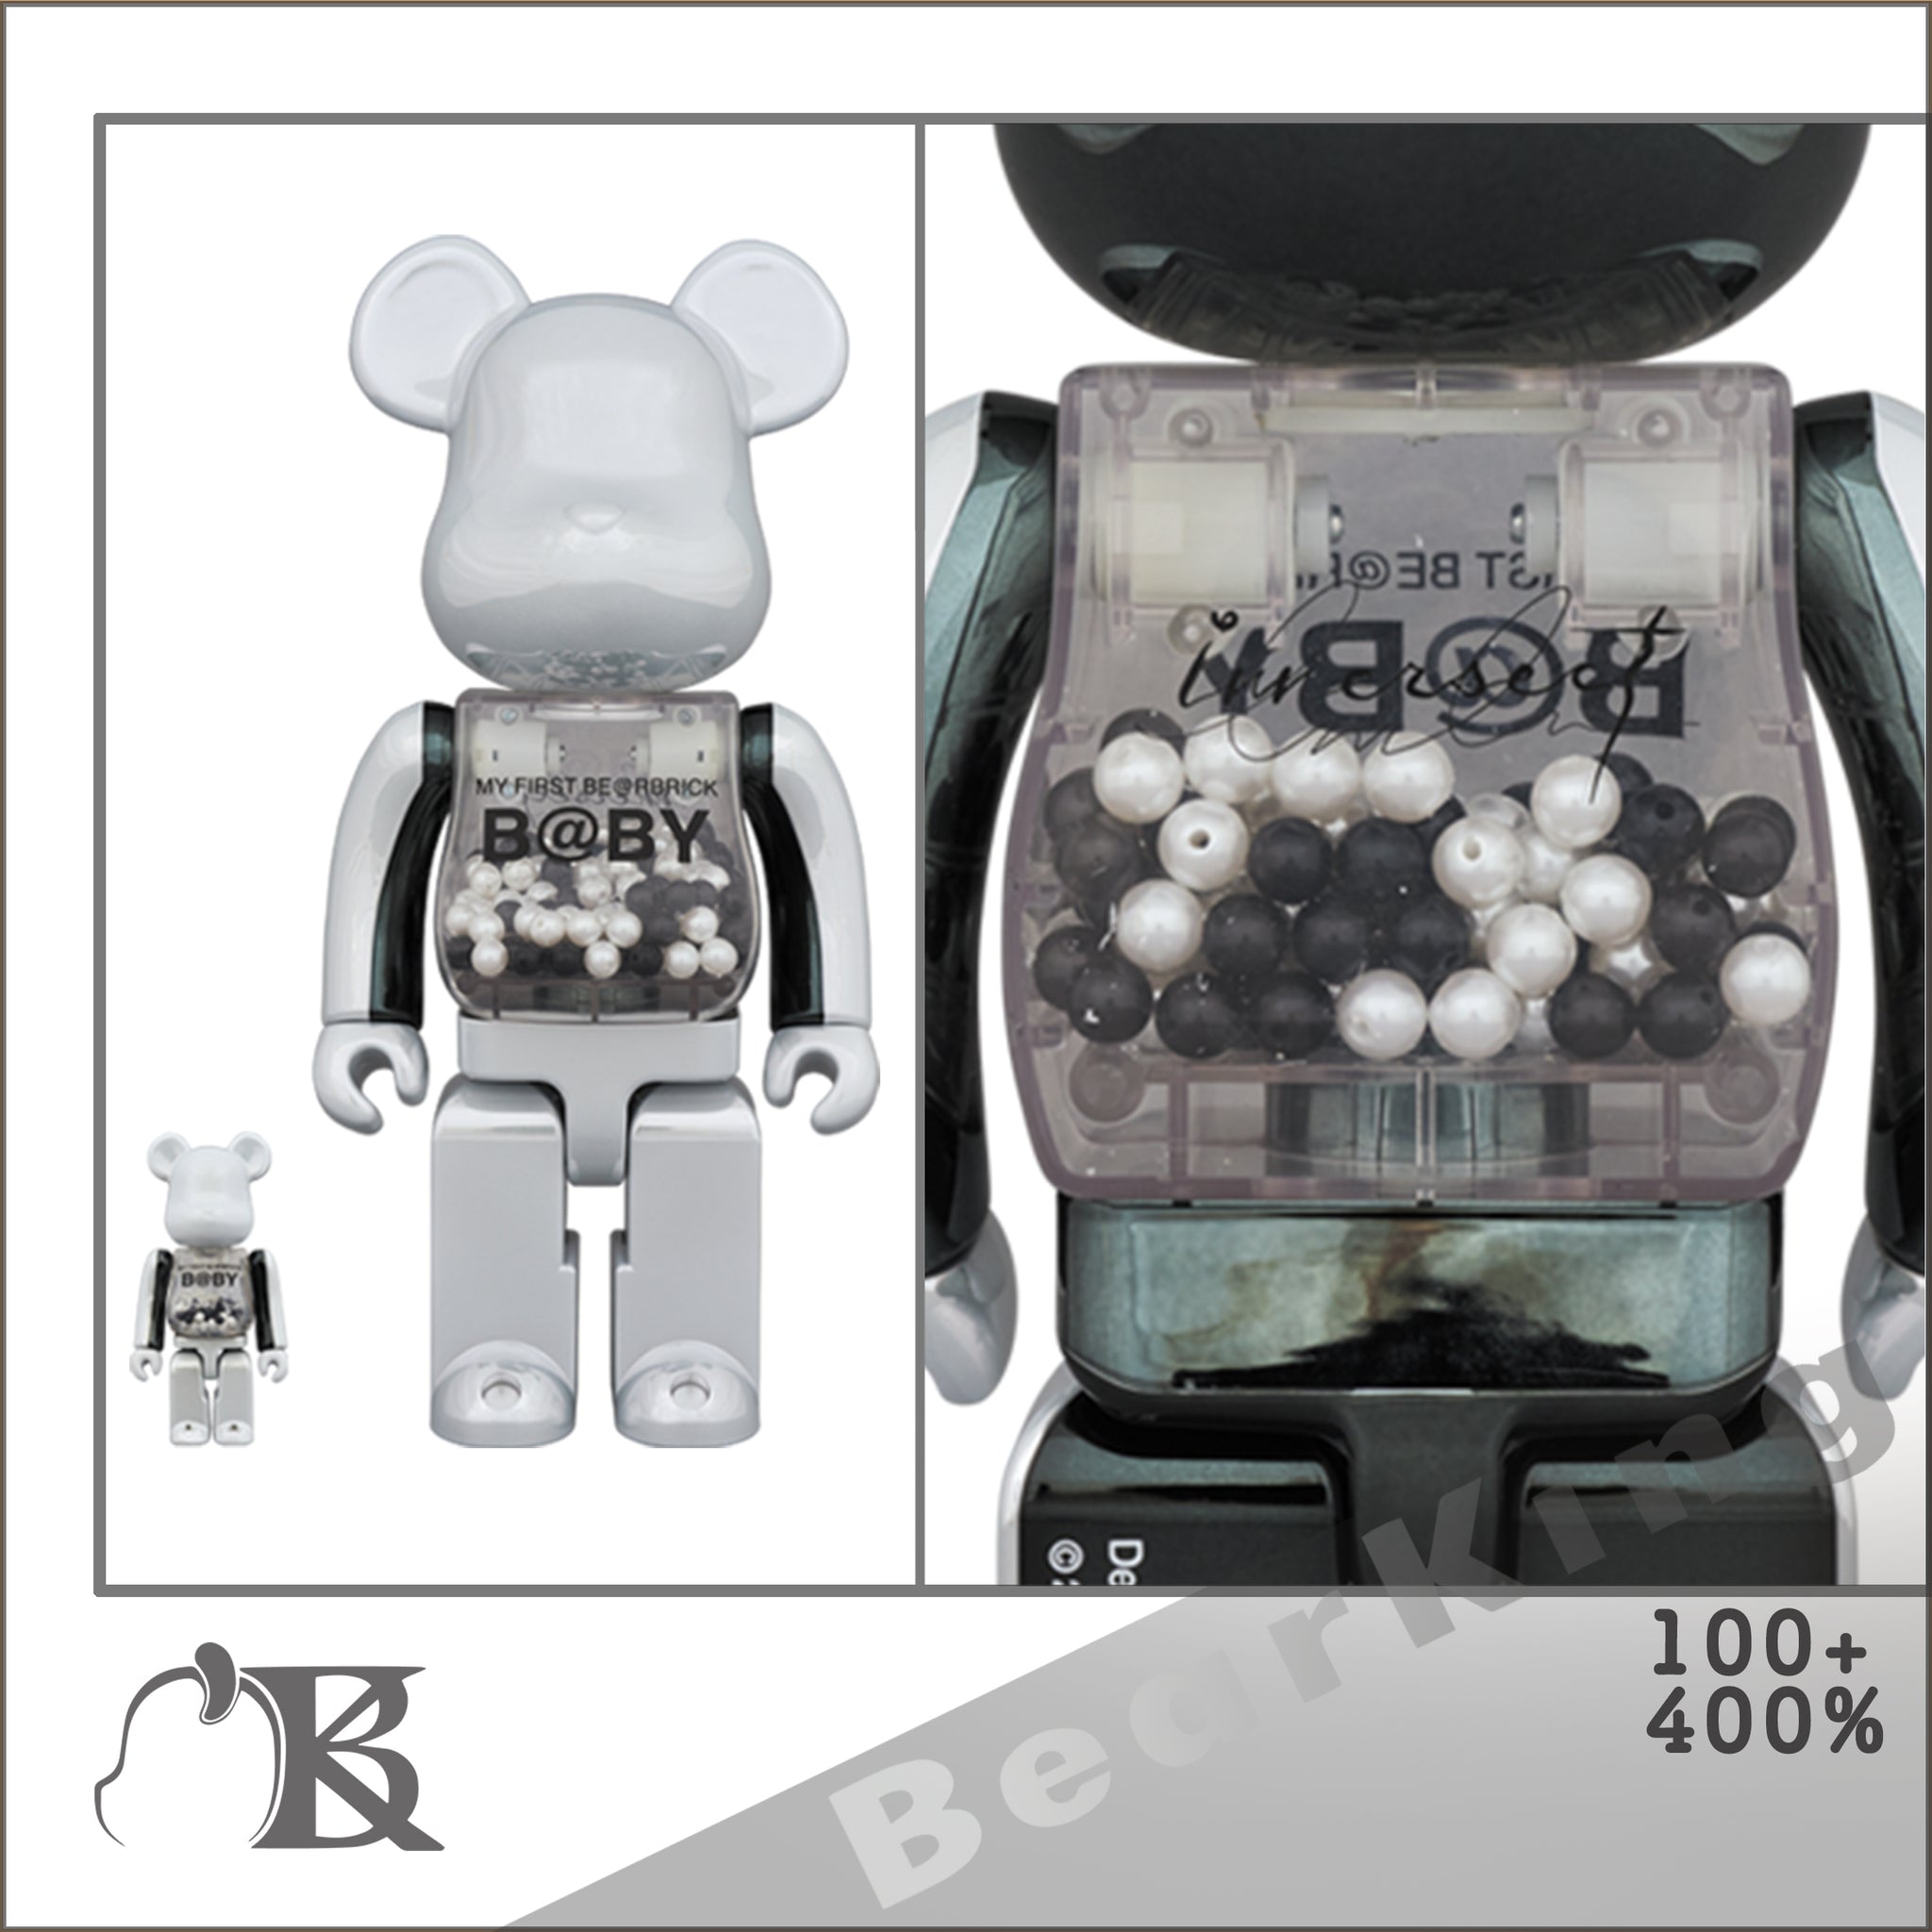 MY FIRST BE@RBRICK B@BY COLOR SPLASH400％ベアブリック - その他